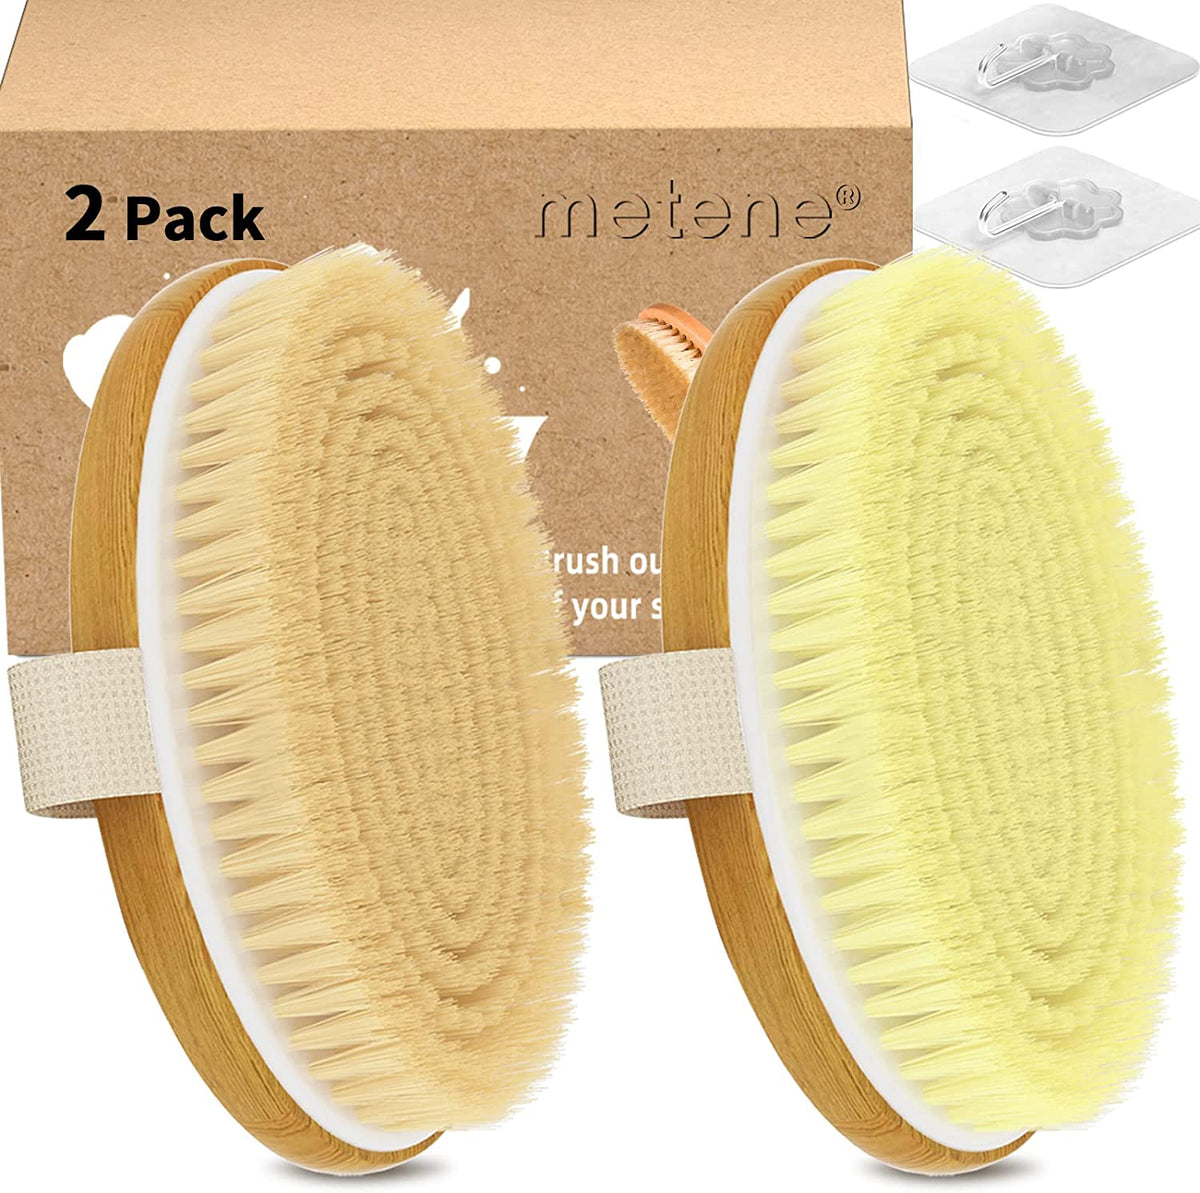 Metene Soft Silicone Body Scrubber, Exfoliating Shower Scrubber for Cleansing Skin, Lathers Well, Size: One size, Black